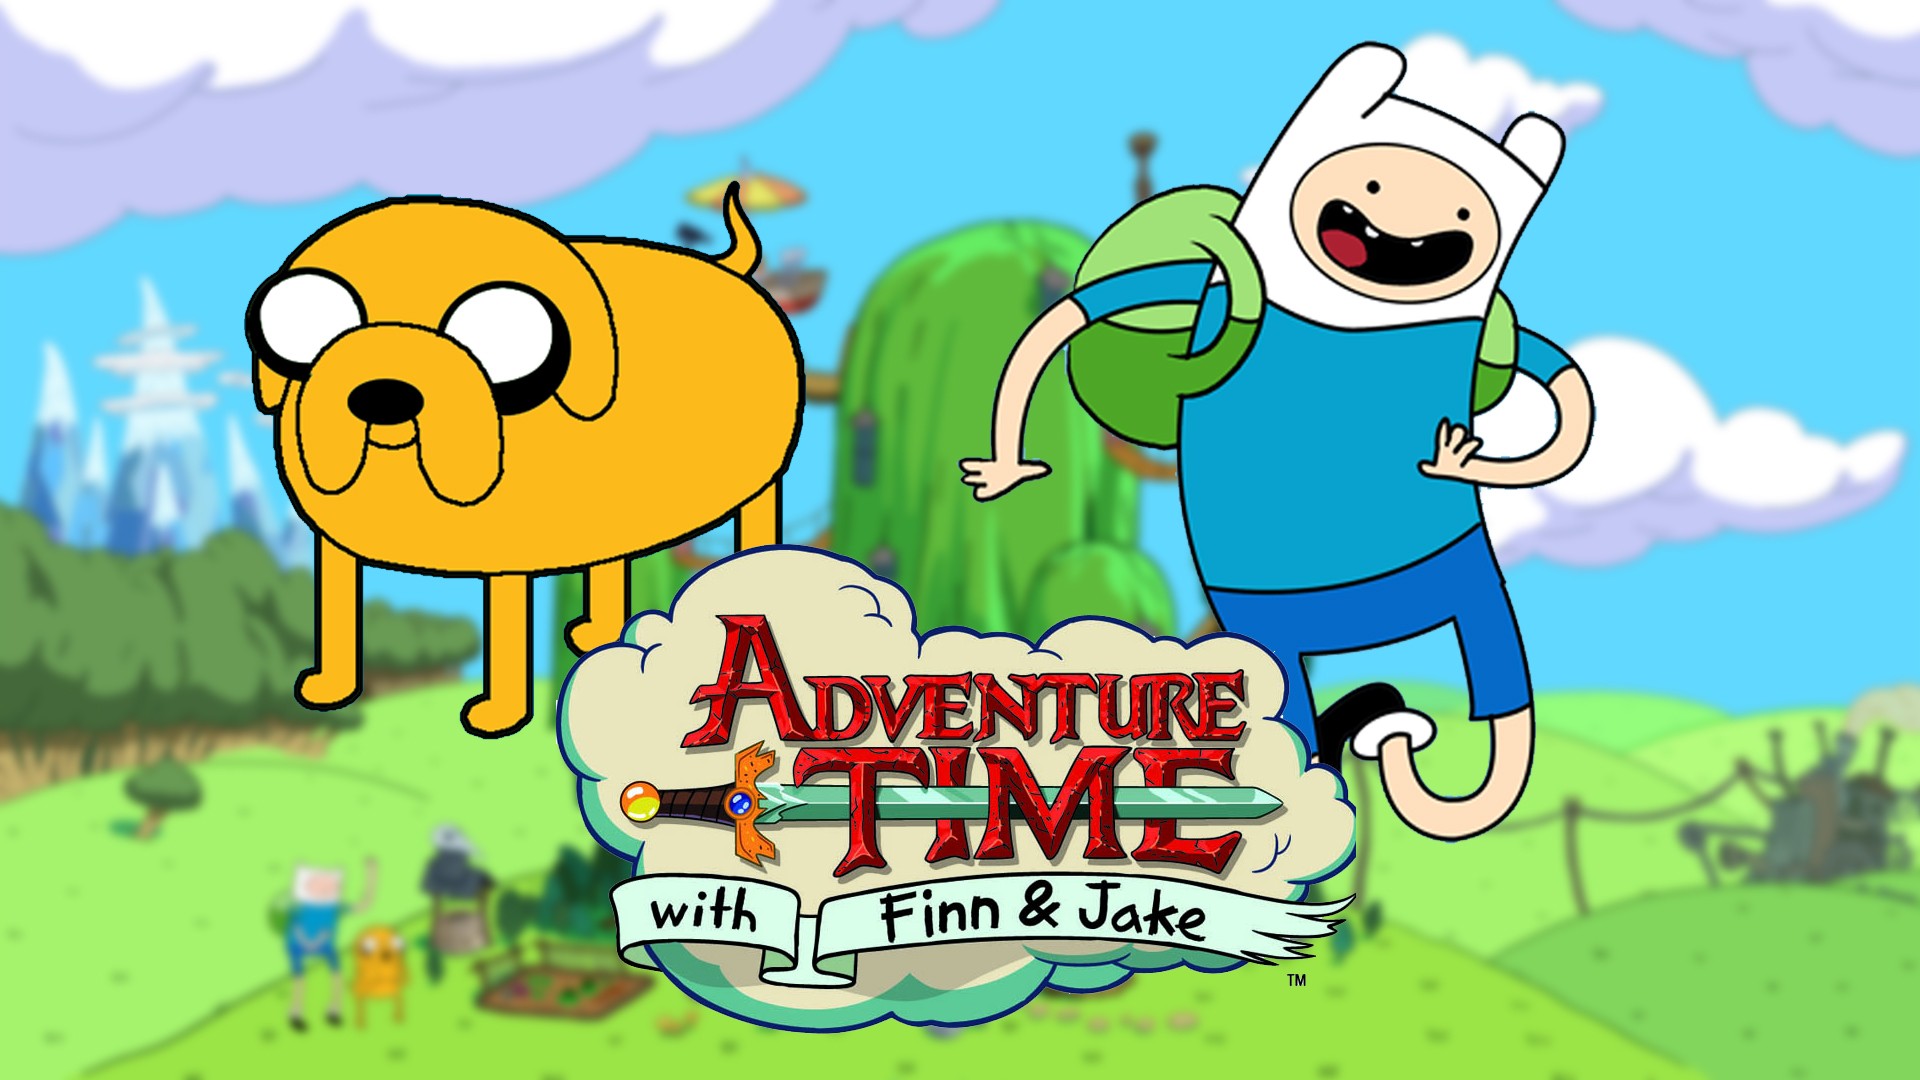 Time Wallpaper 1920x1080 Adventure Time Adventure Time With Finn